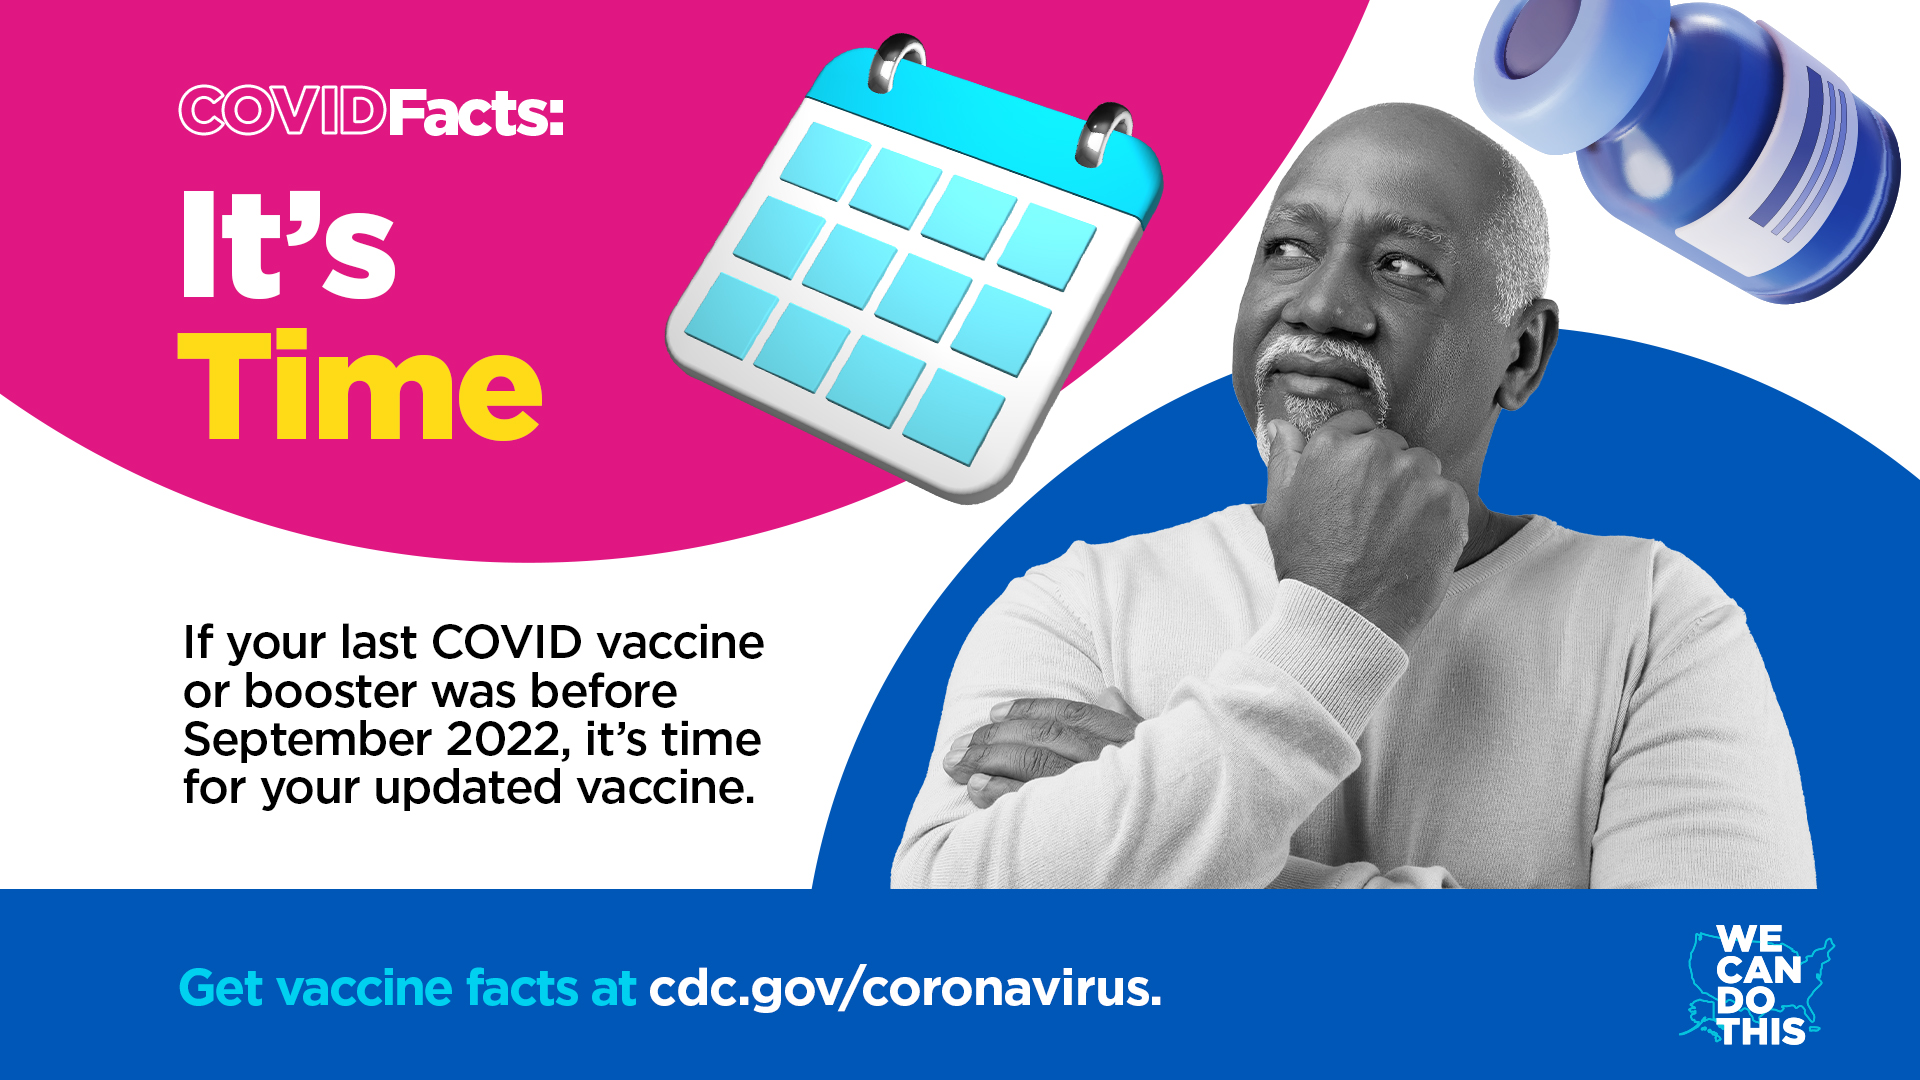 An older adult man in a thinking pose. Text reads, "COVID Facts: It’s Time. If your last COVID vaccine or booster was before September 2022, it’s time for your updated vaccine. Get vaccines facts at cdc.gov/coronavirus"